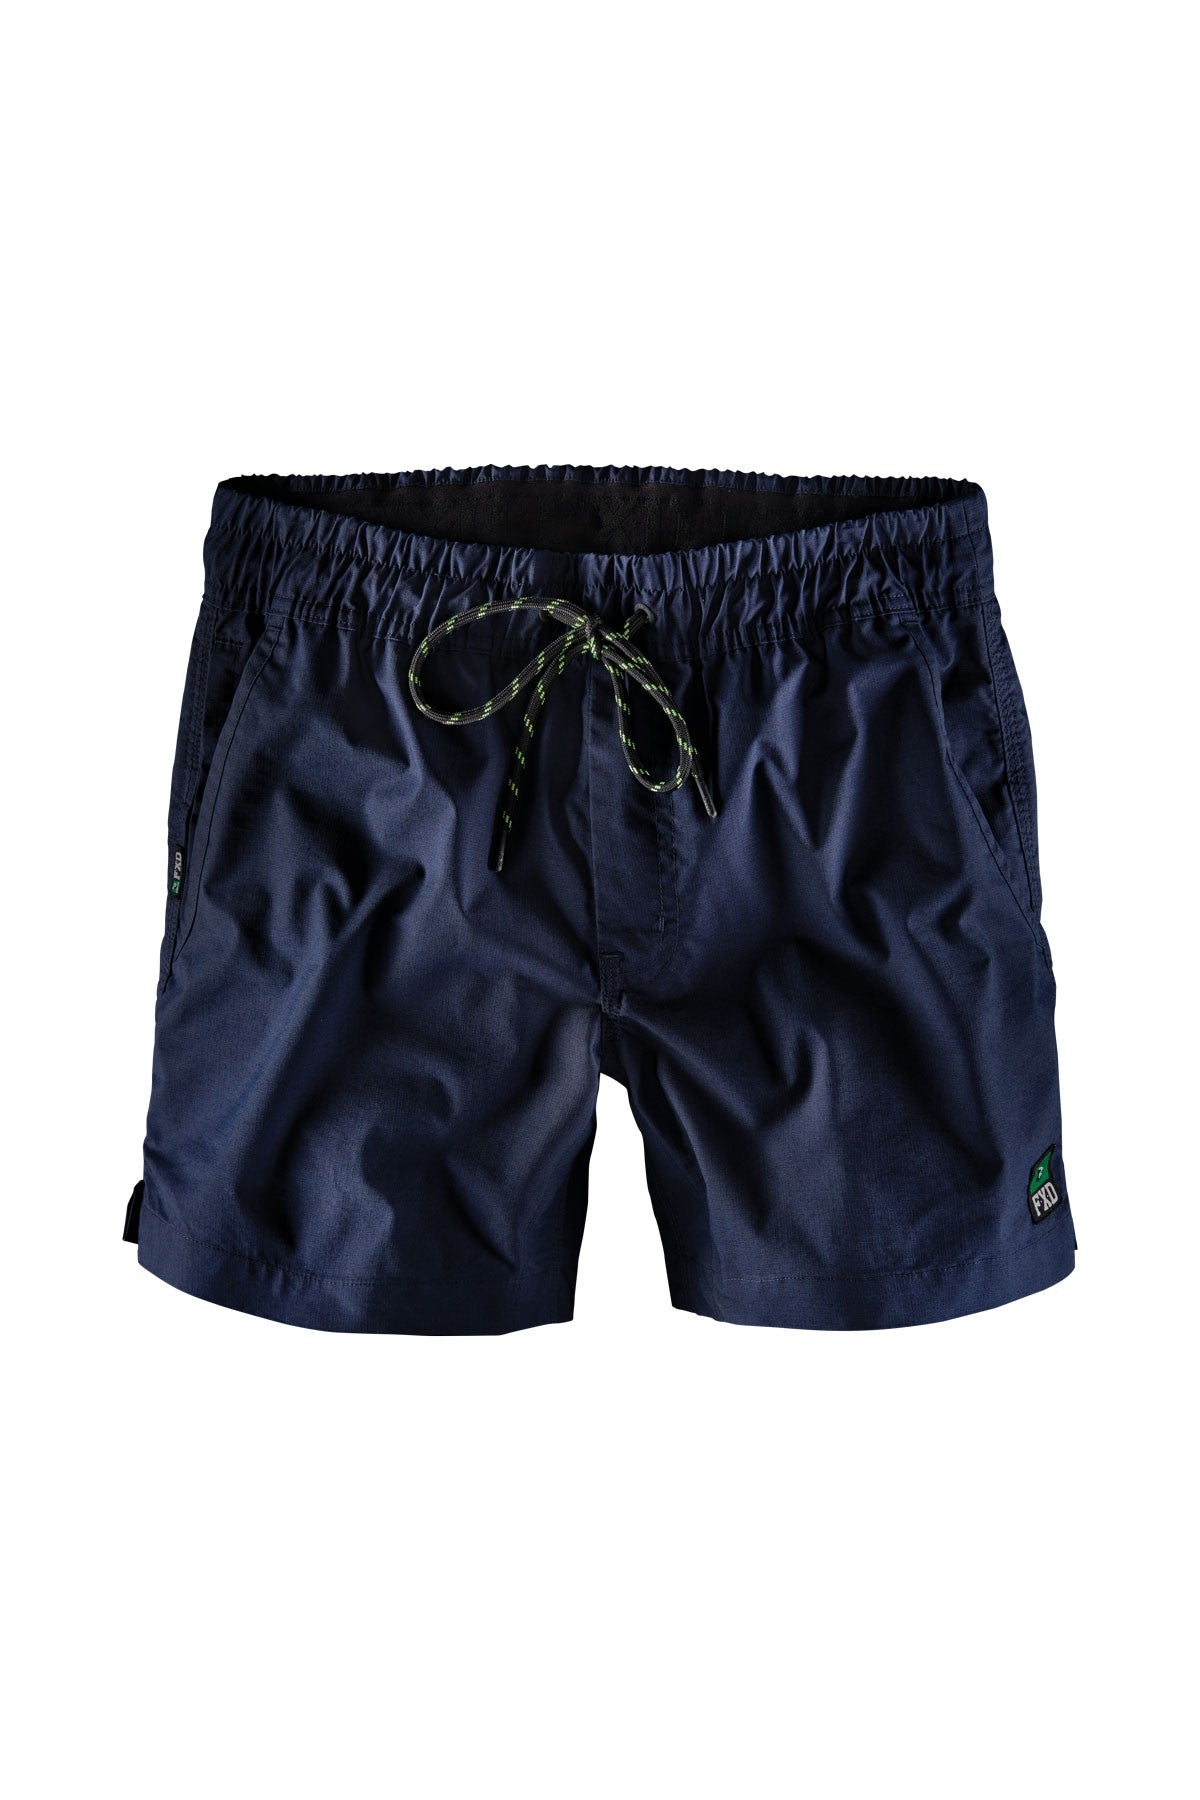 FXD- WS-4 Repreve® recycled polyester stretch ripstop Short